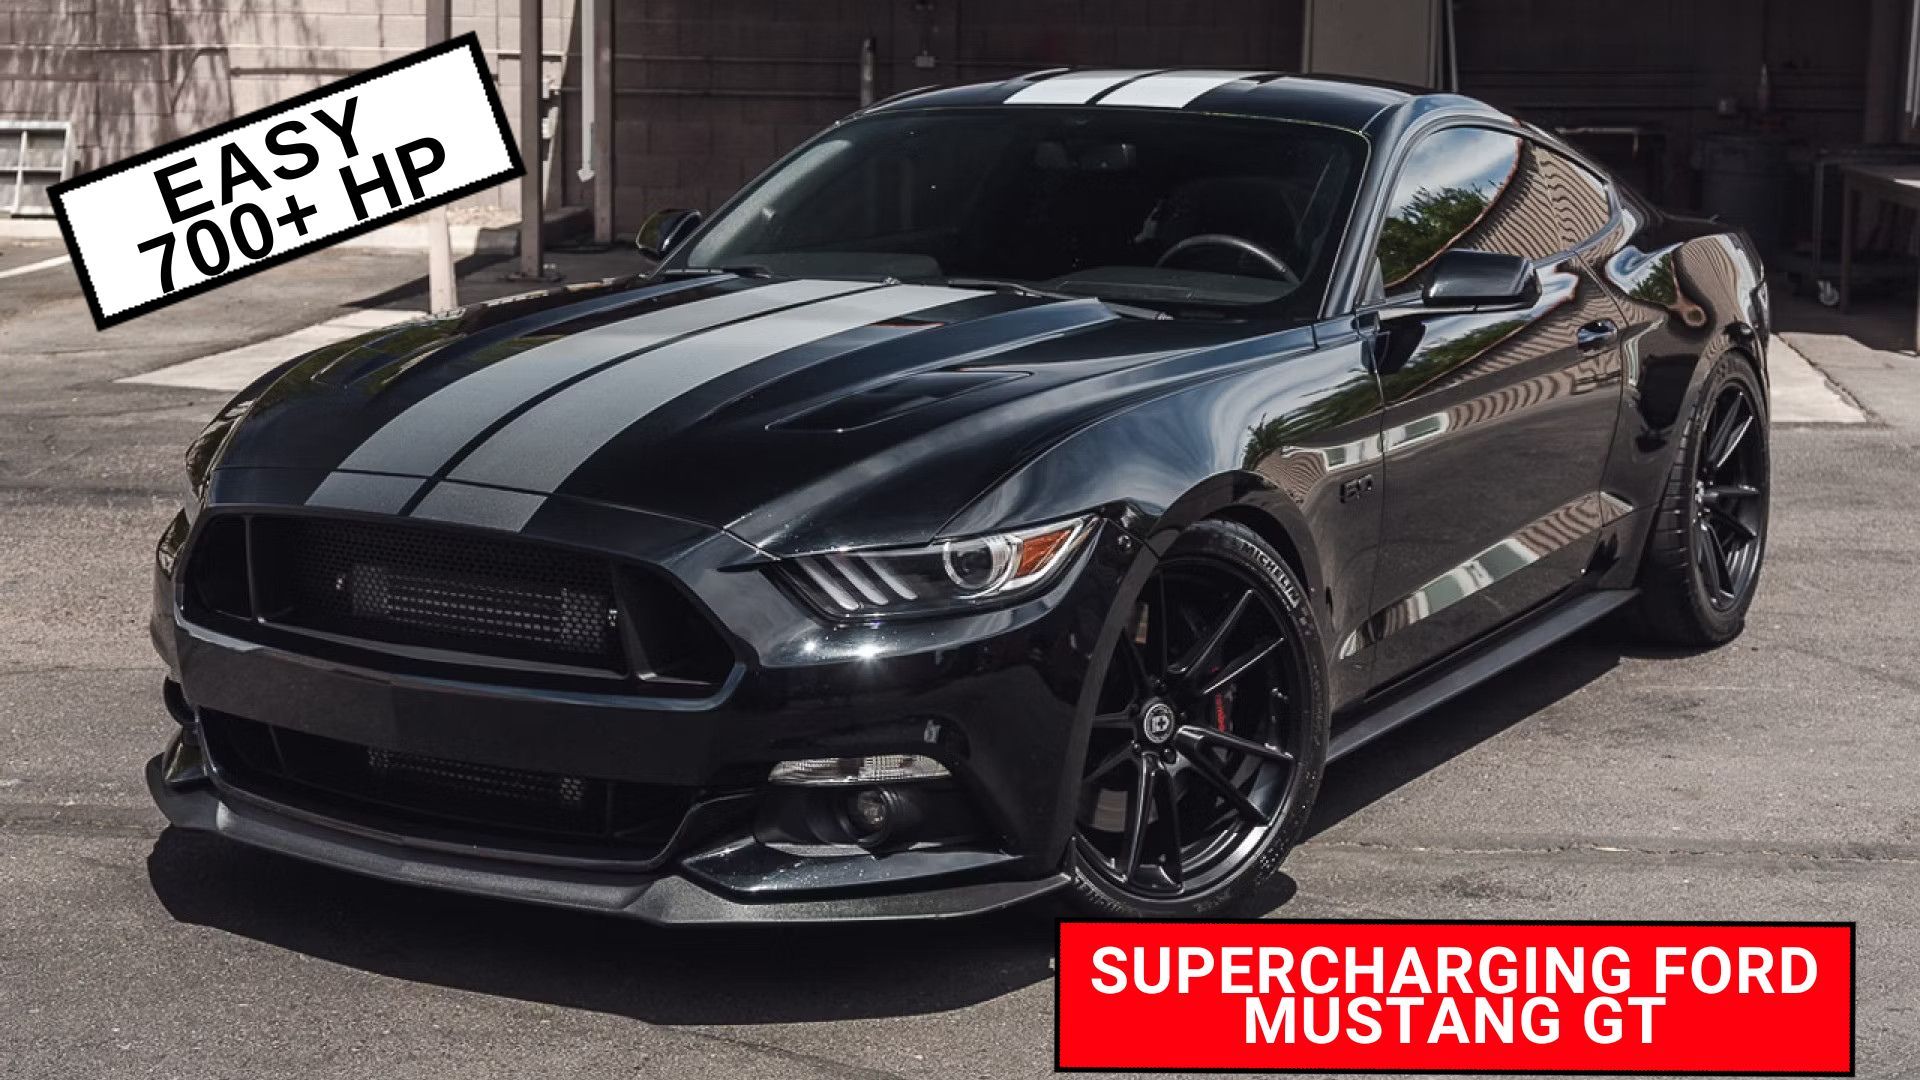 Supercharging Black Ford Mustang GT S550